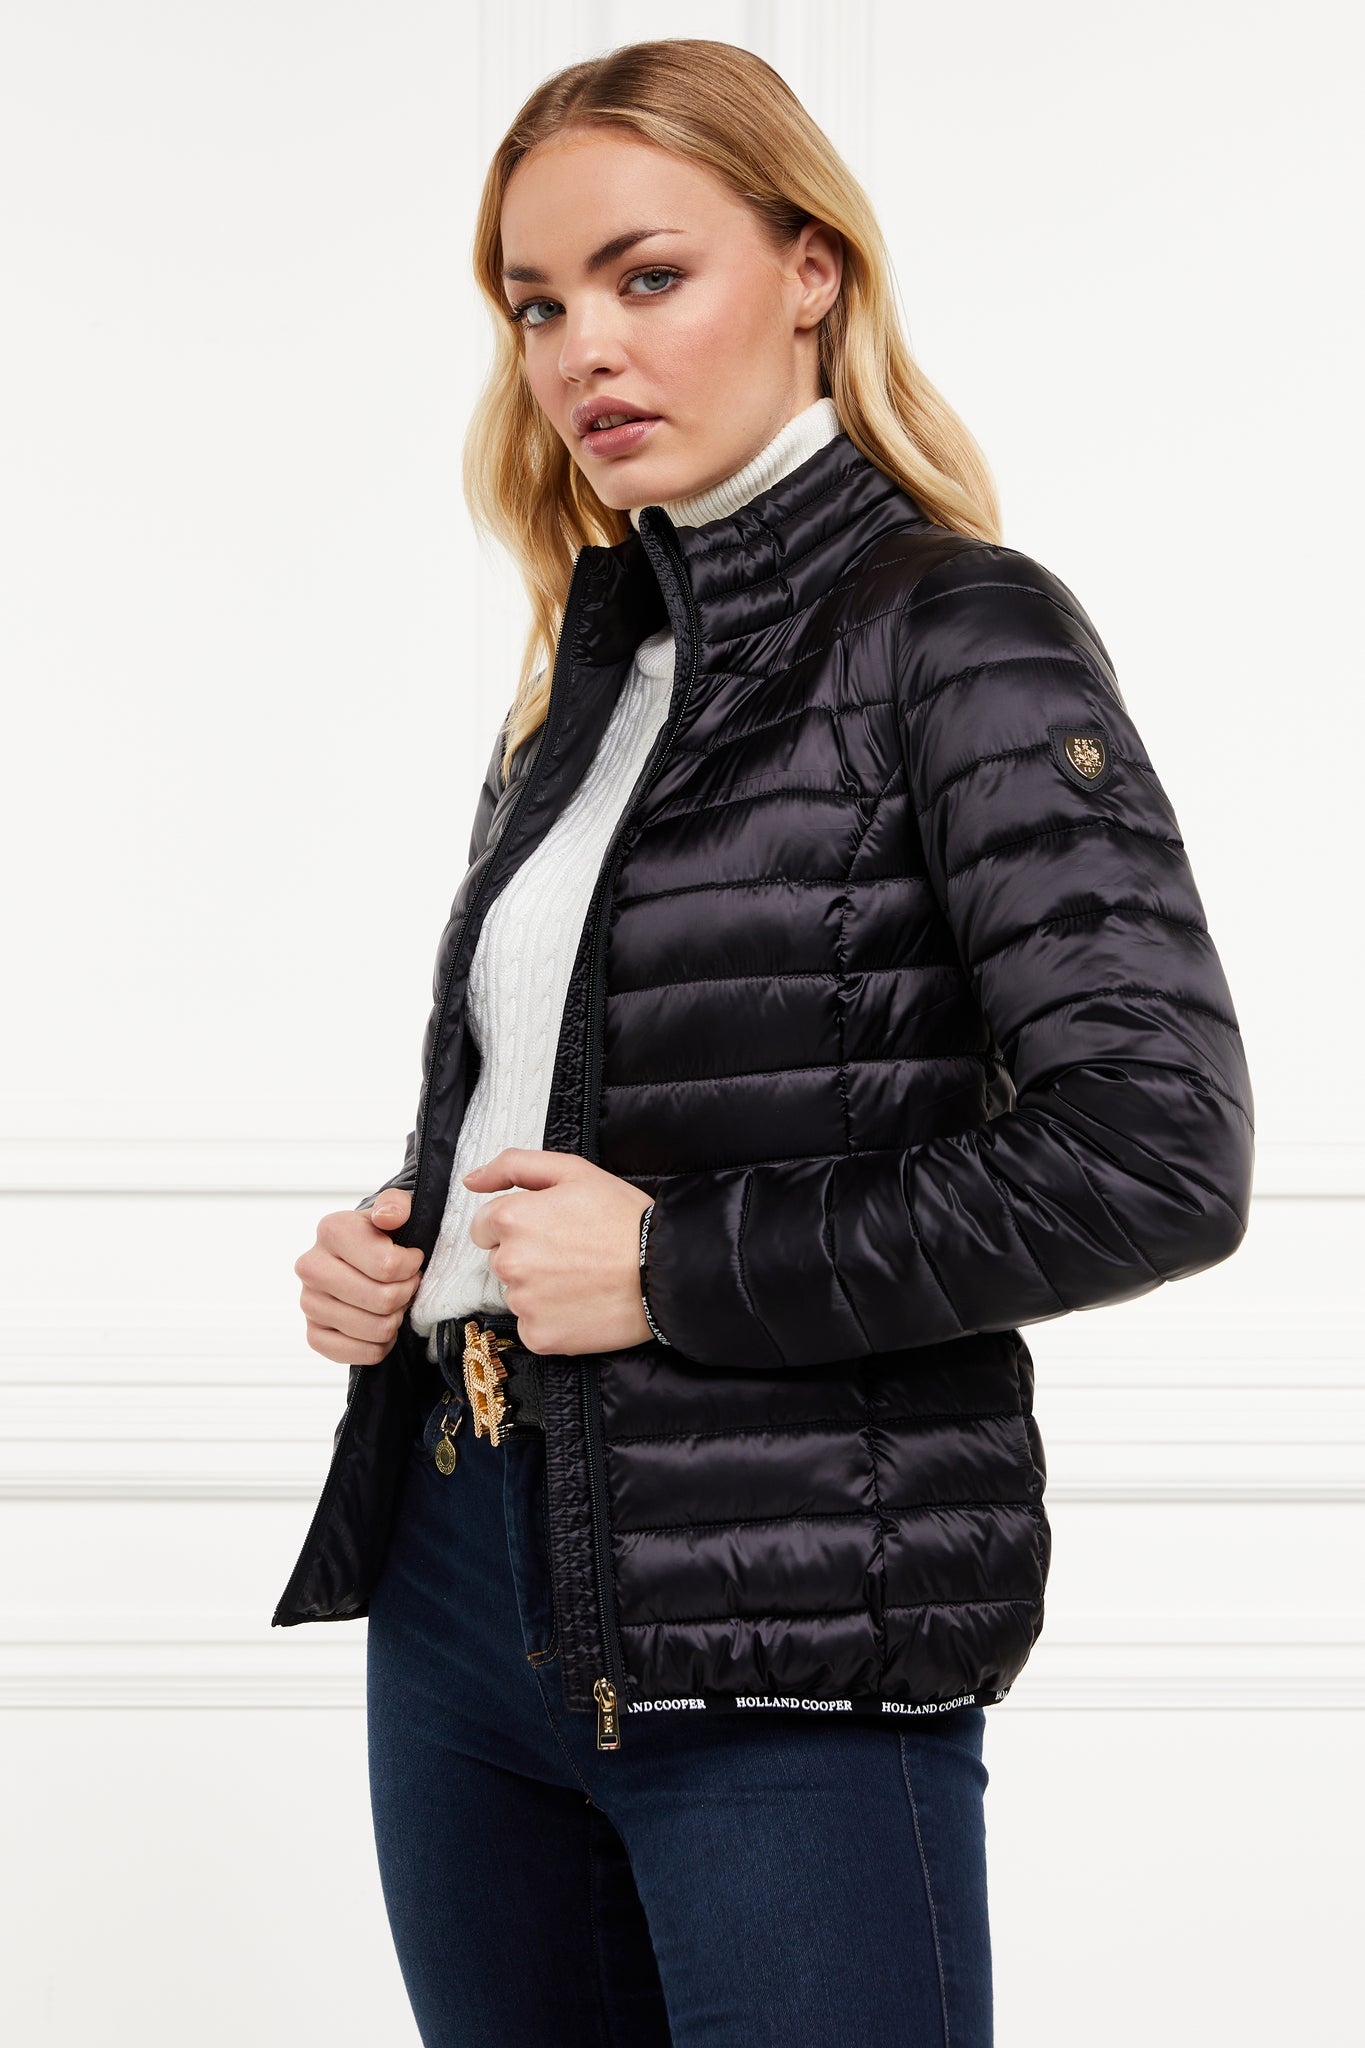 womens lightweight hoodless padded black jacket with embroidery detail on back high neck and elasticated cuffs and hem. easily packs away into separate small bag of the same colour with handle 